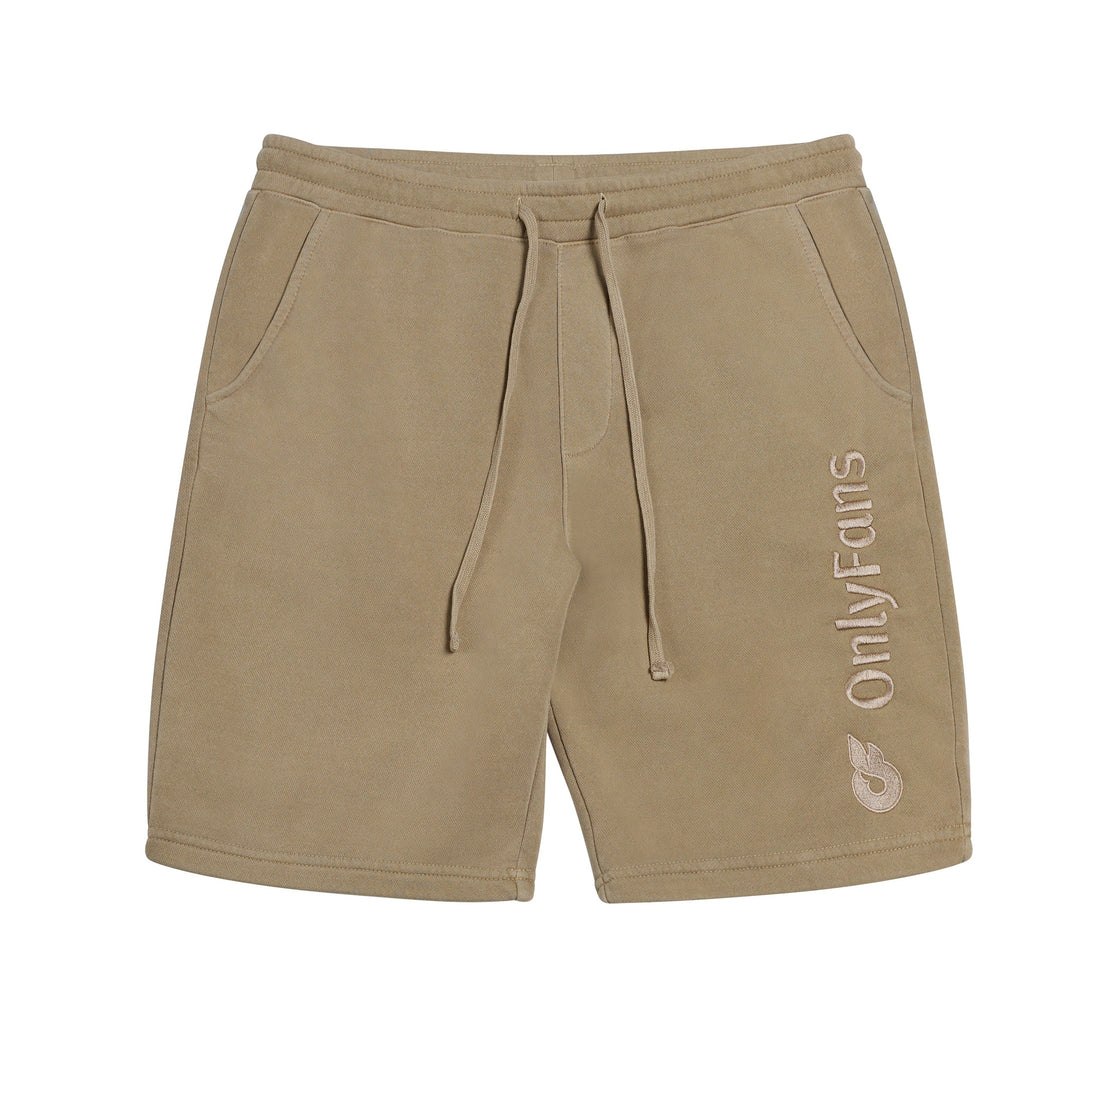 OnlyFans Shorts - Tan